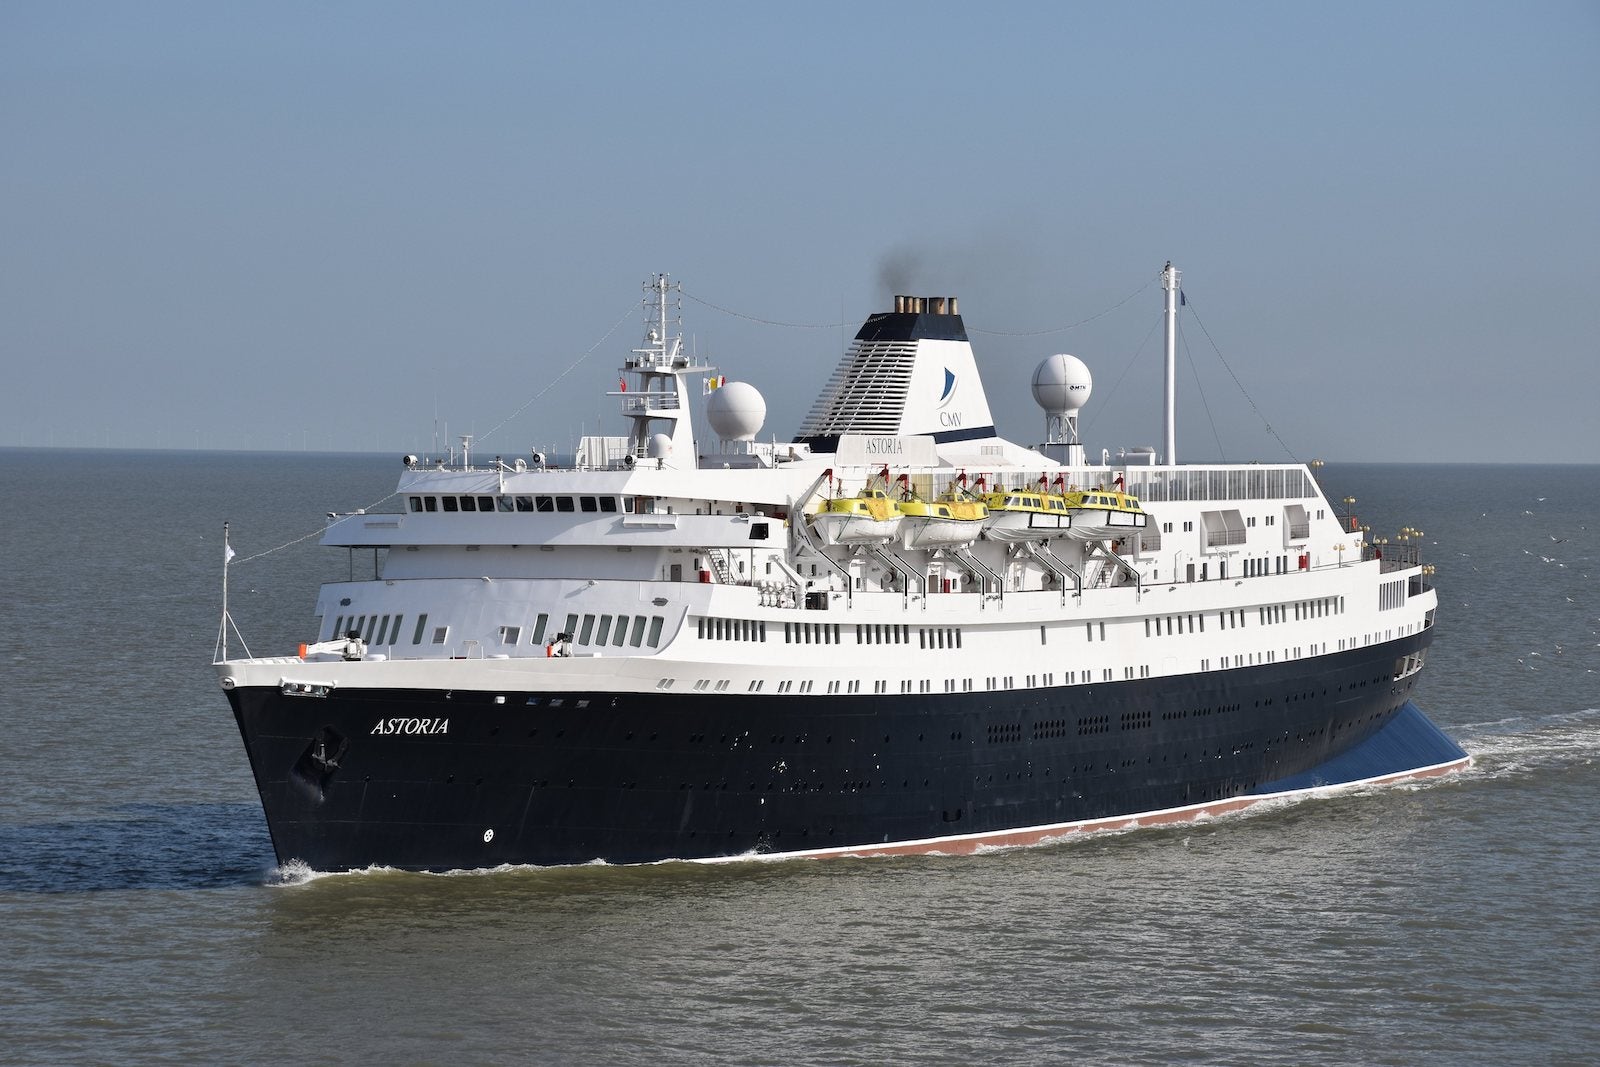 End of an era: The world's oldest cruise ship is finally heading to the scrapper